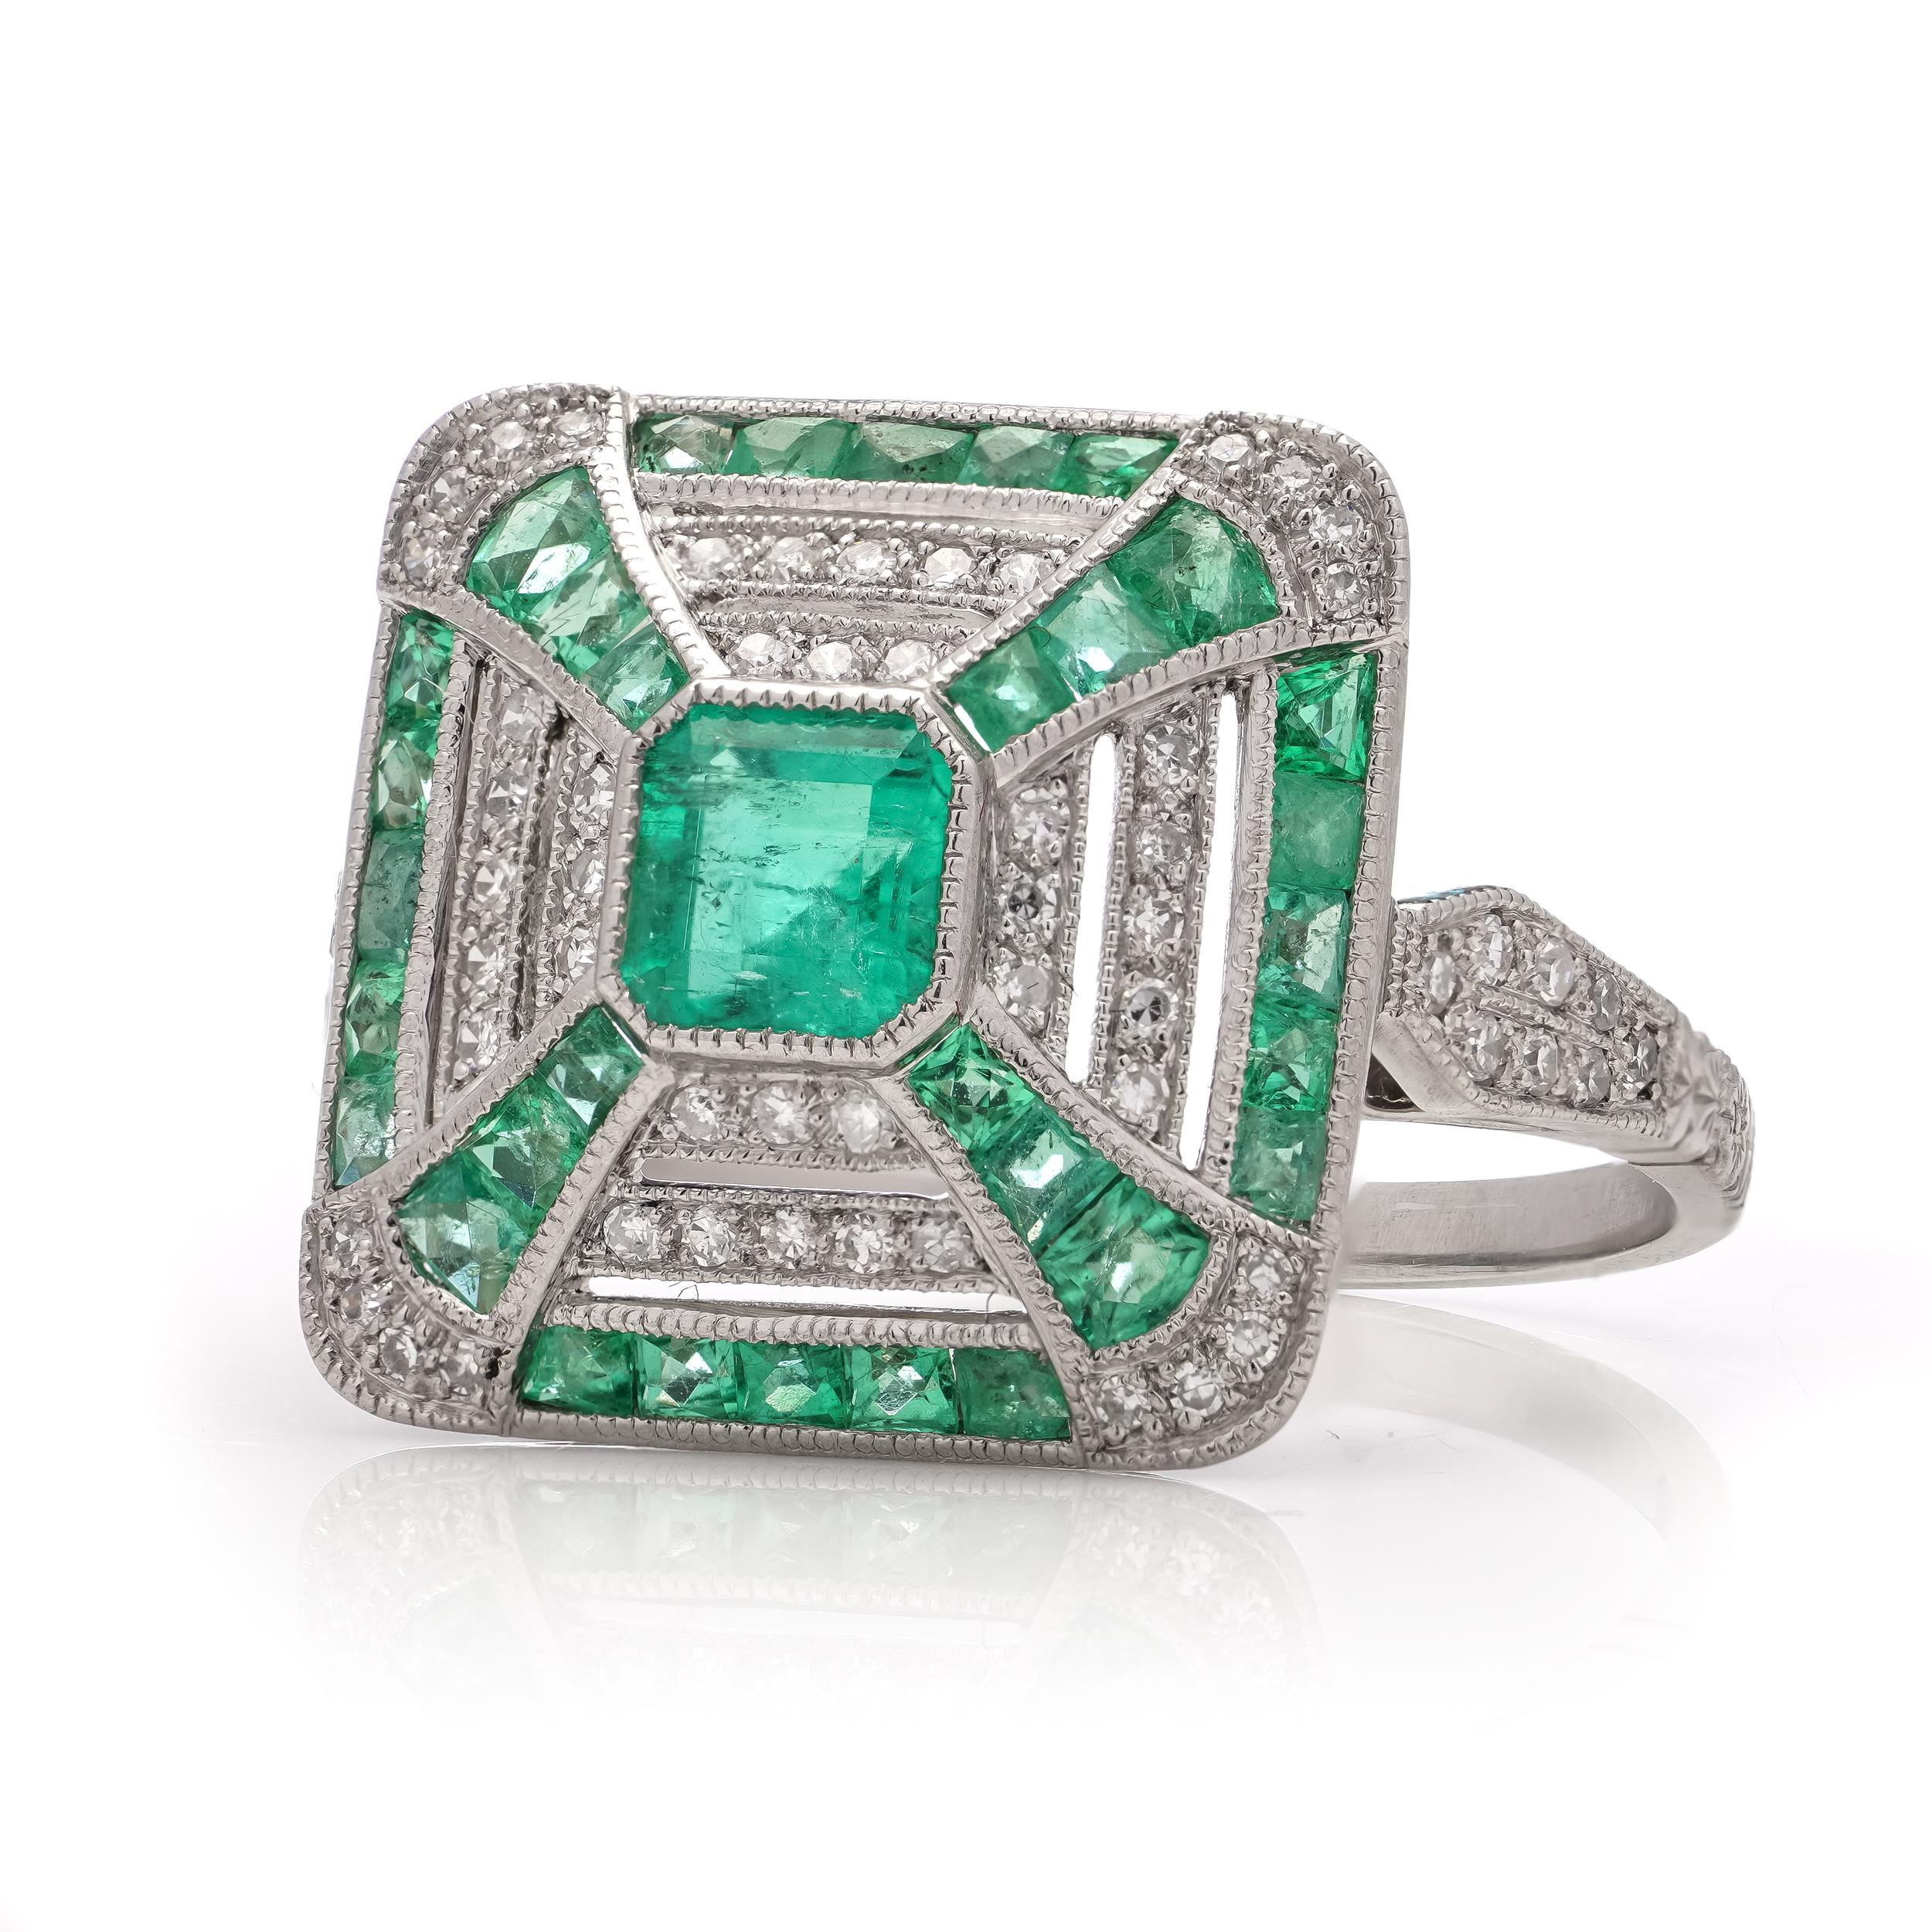 Platinum Art Deco-inspired 0.42 carats of Emerald fashion ring, surrounded by brilliant cut diamonds.

Made in After 2000
X-Ray tested positive for .850 platinum purity.

Dimensions -
Finger Size (UK) = N (EU) = 54 (US) = 7
Weight: 5.00 grams
Size: